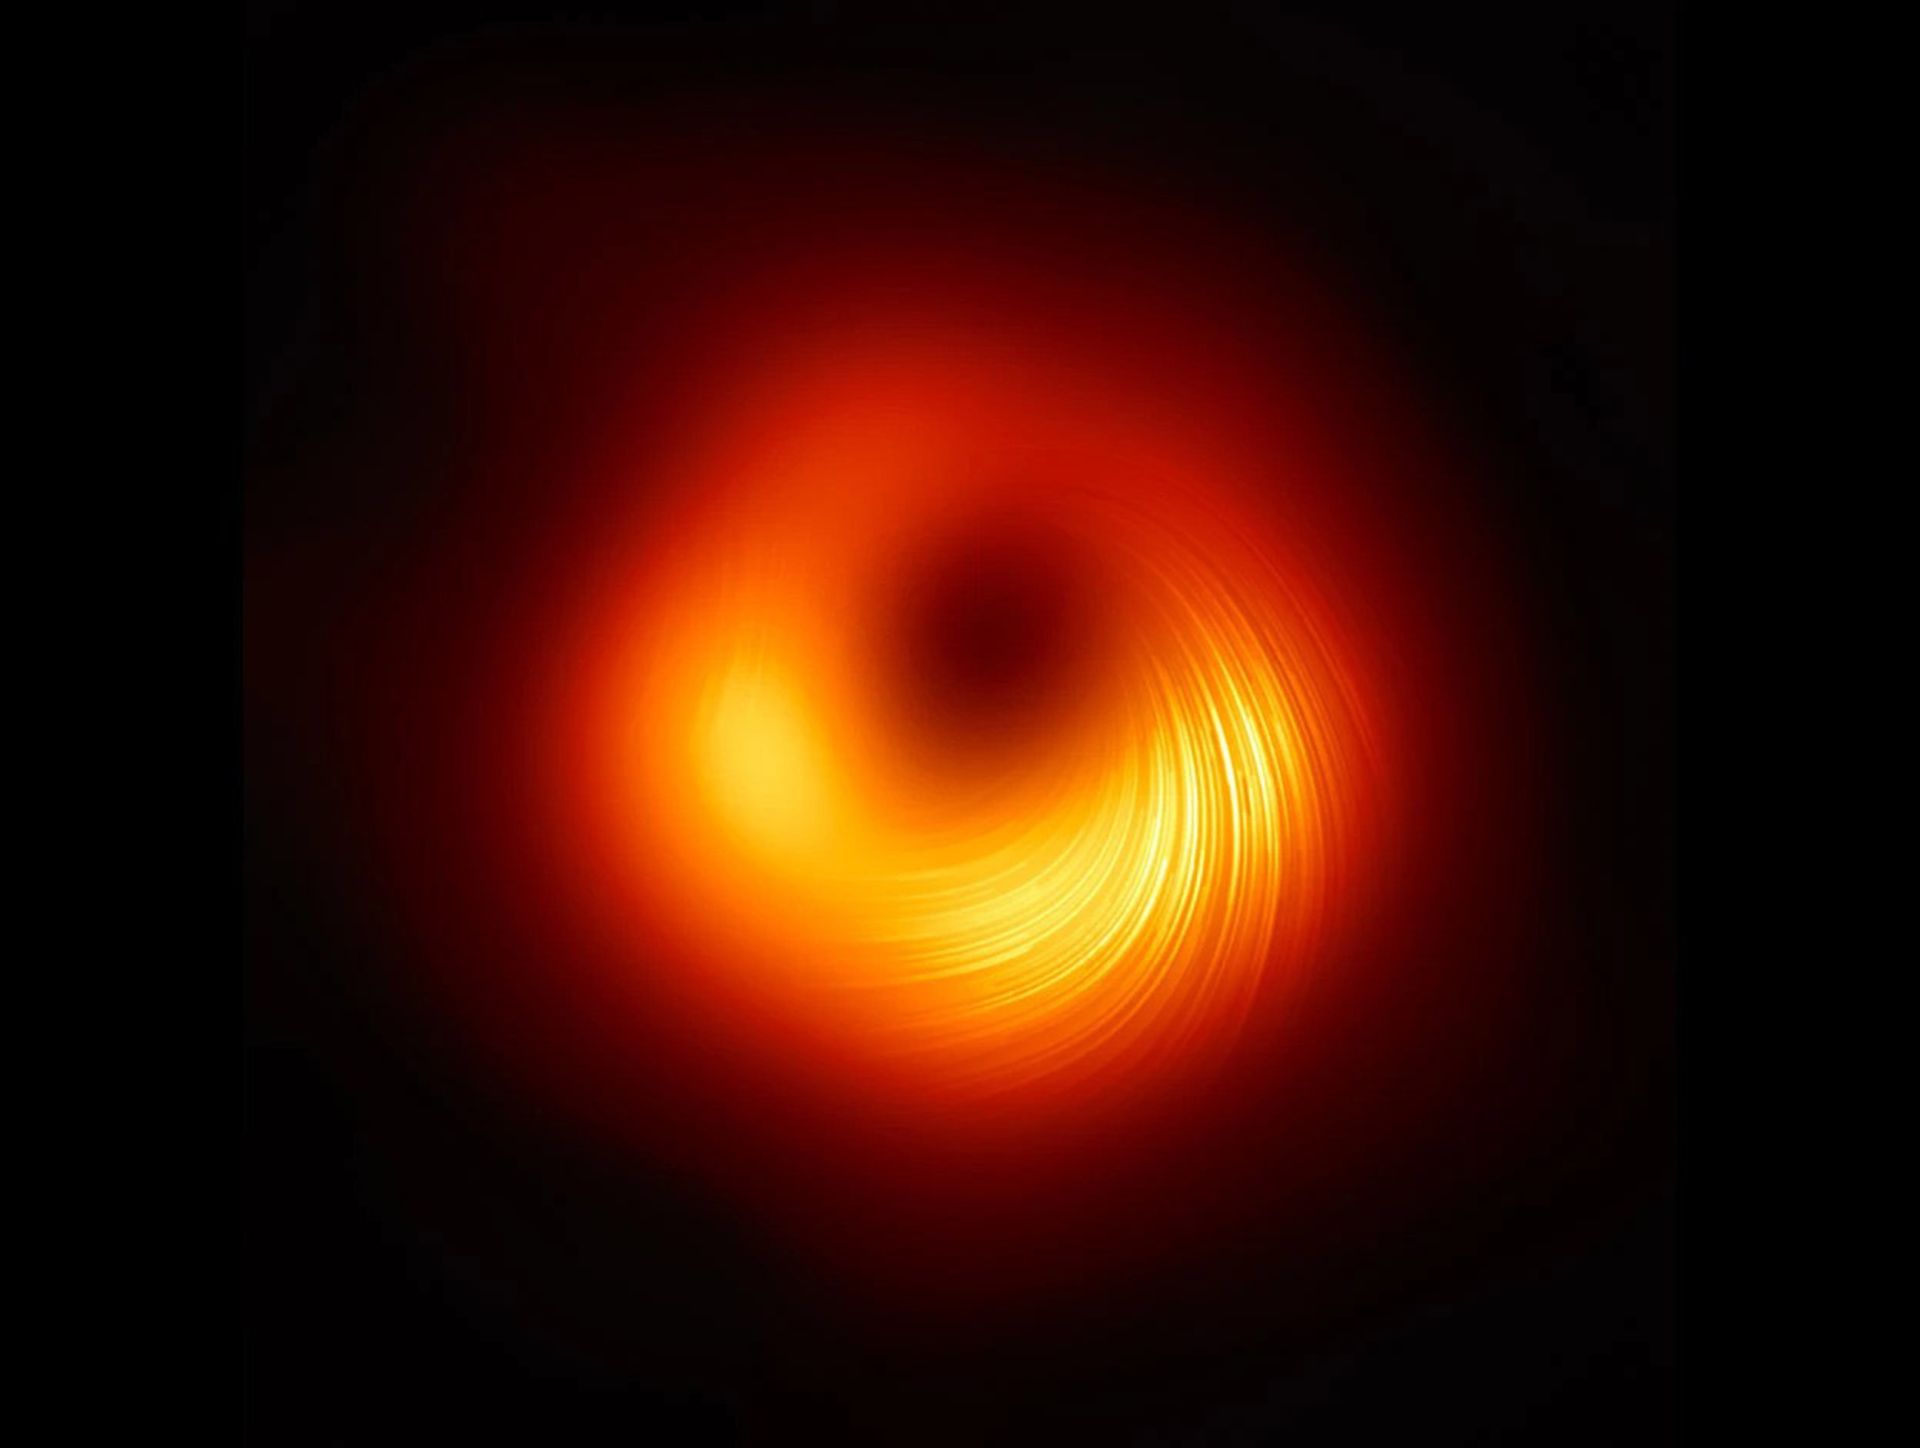 The first photo of a black hole